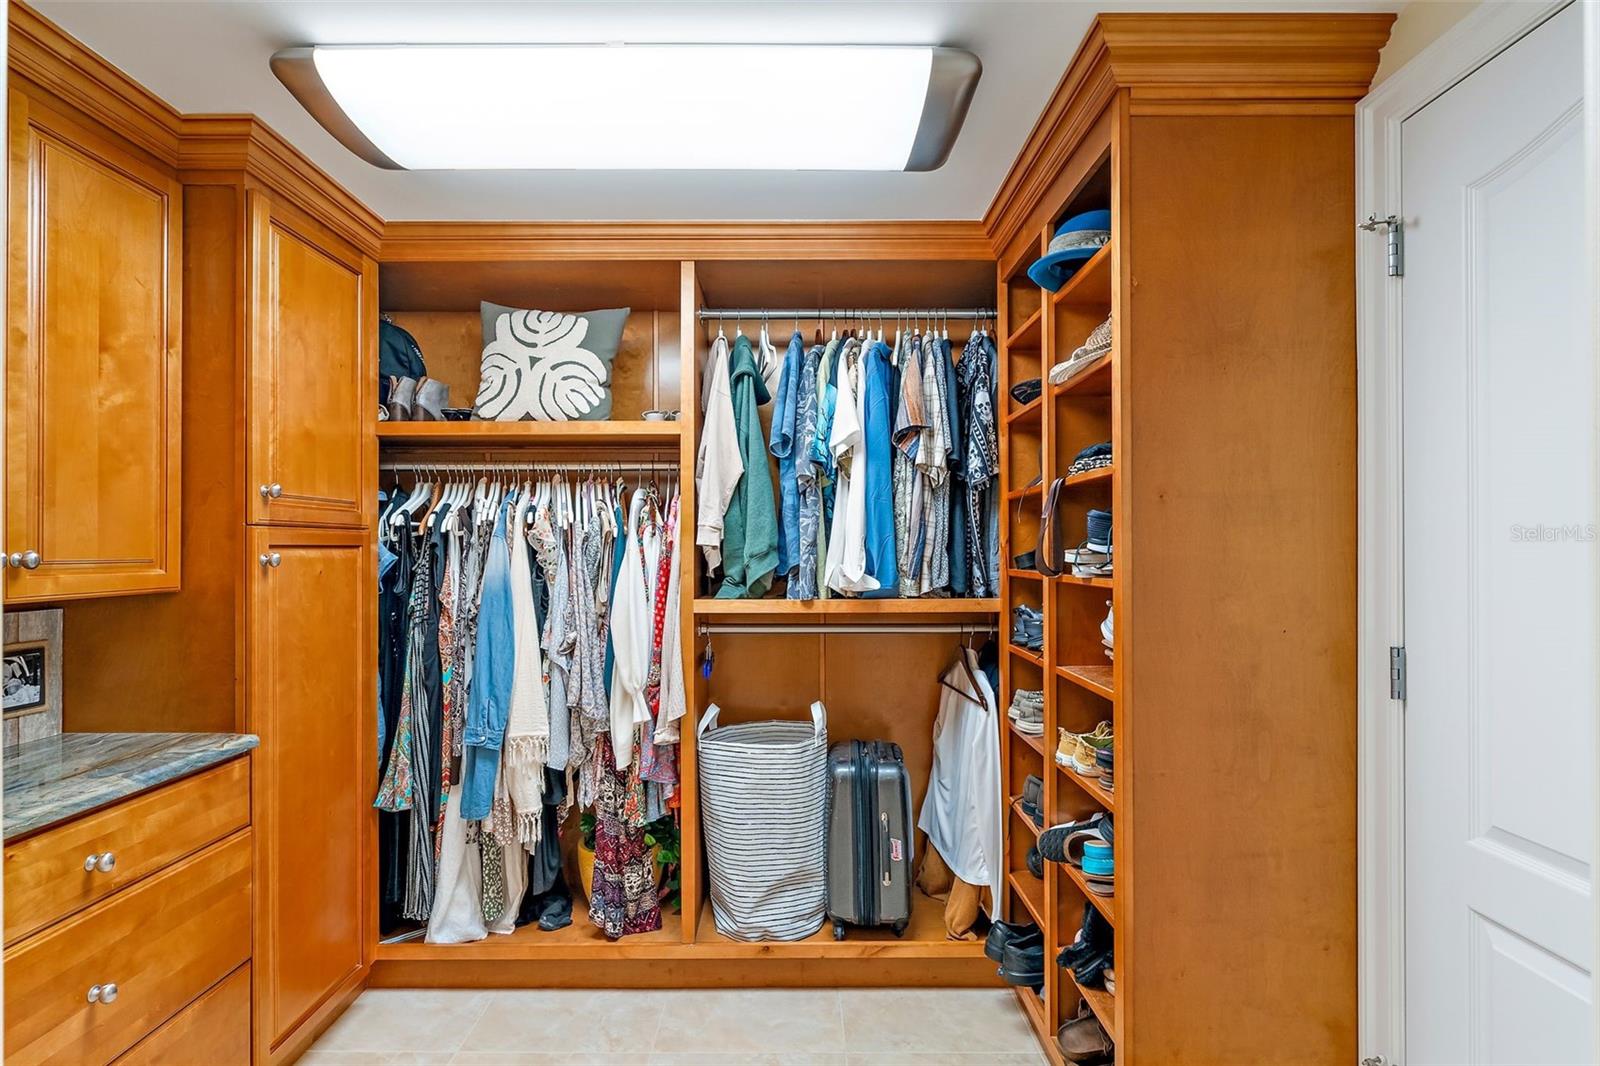 The ante-chamber with built-in closets that dreams are made of, leads to the primary bathroom. This Primary Closet measures 8' X 9'.